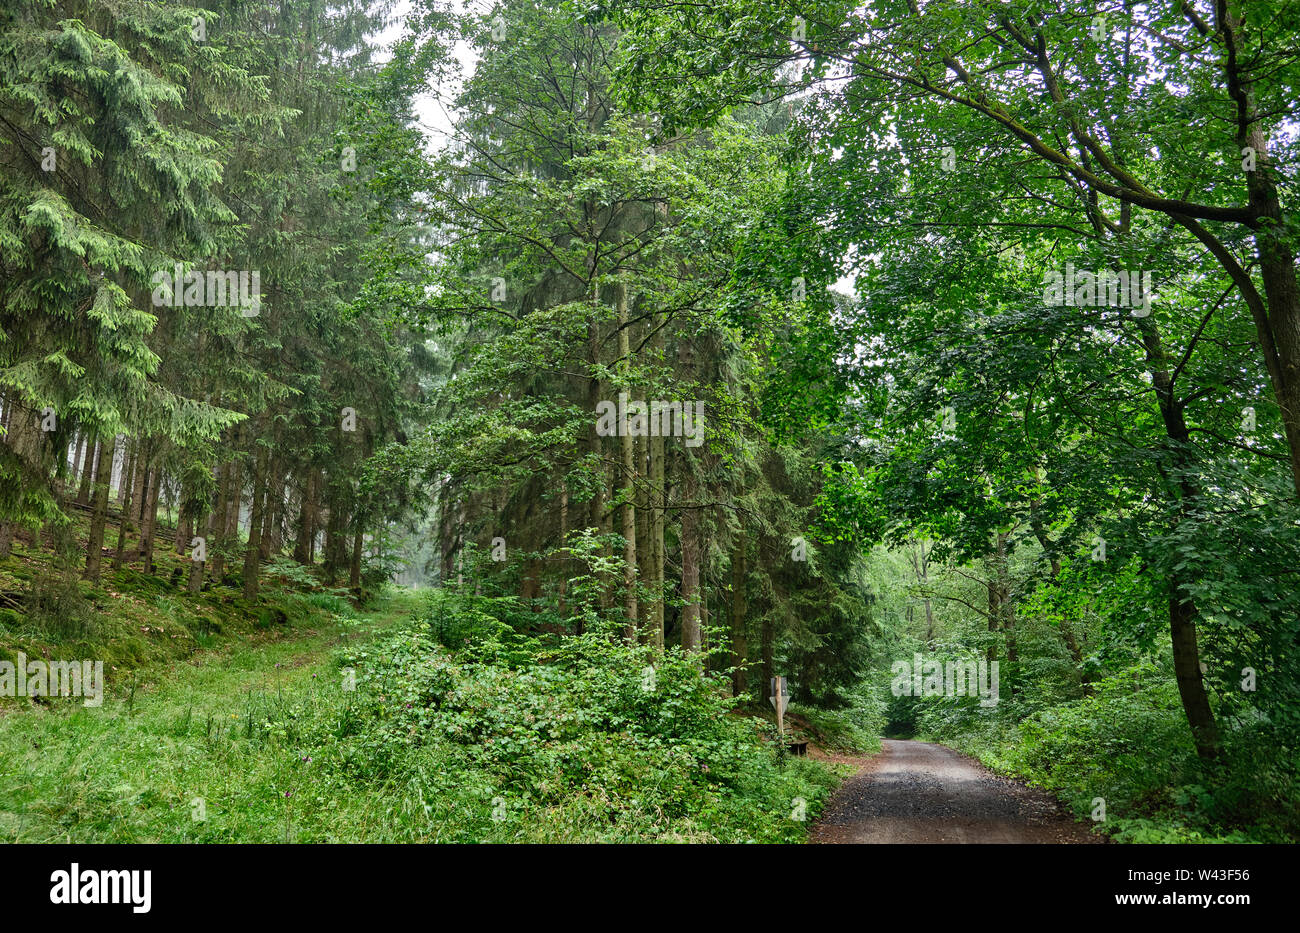 A footpath and cycle path leading through a beautiful green forest with fresh lush foliage Stock Photo